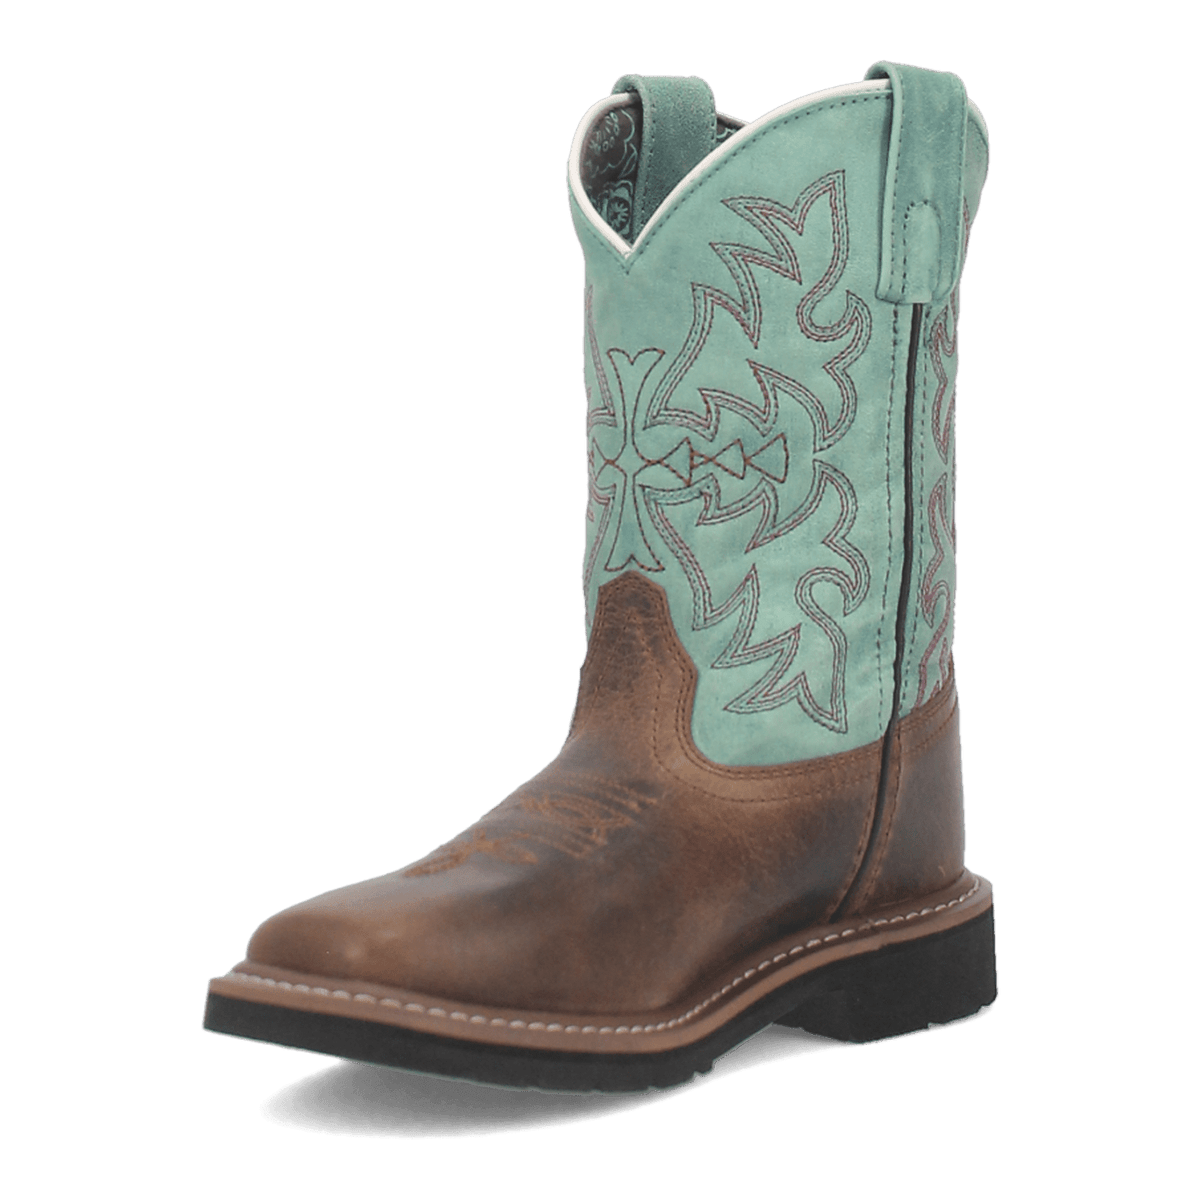 NIA LEATHER CHILDREN'S BOOT Image